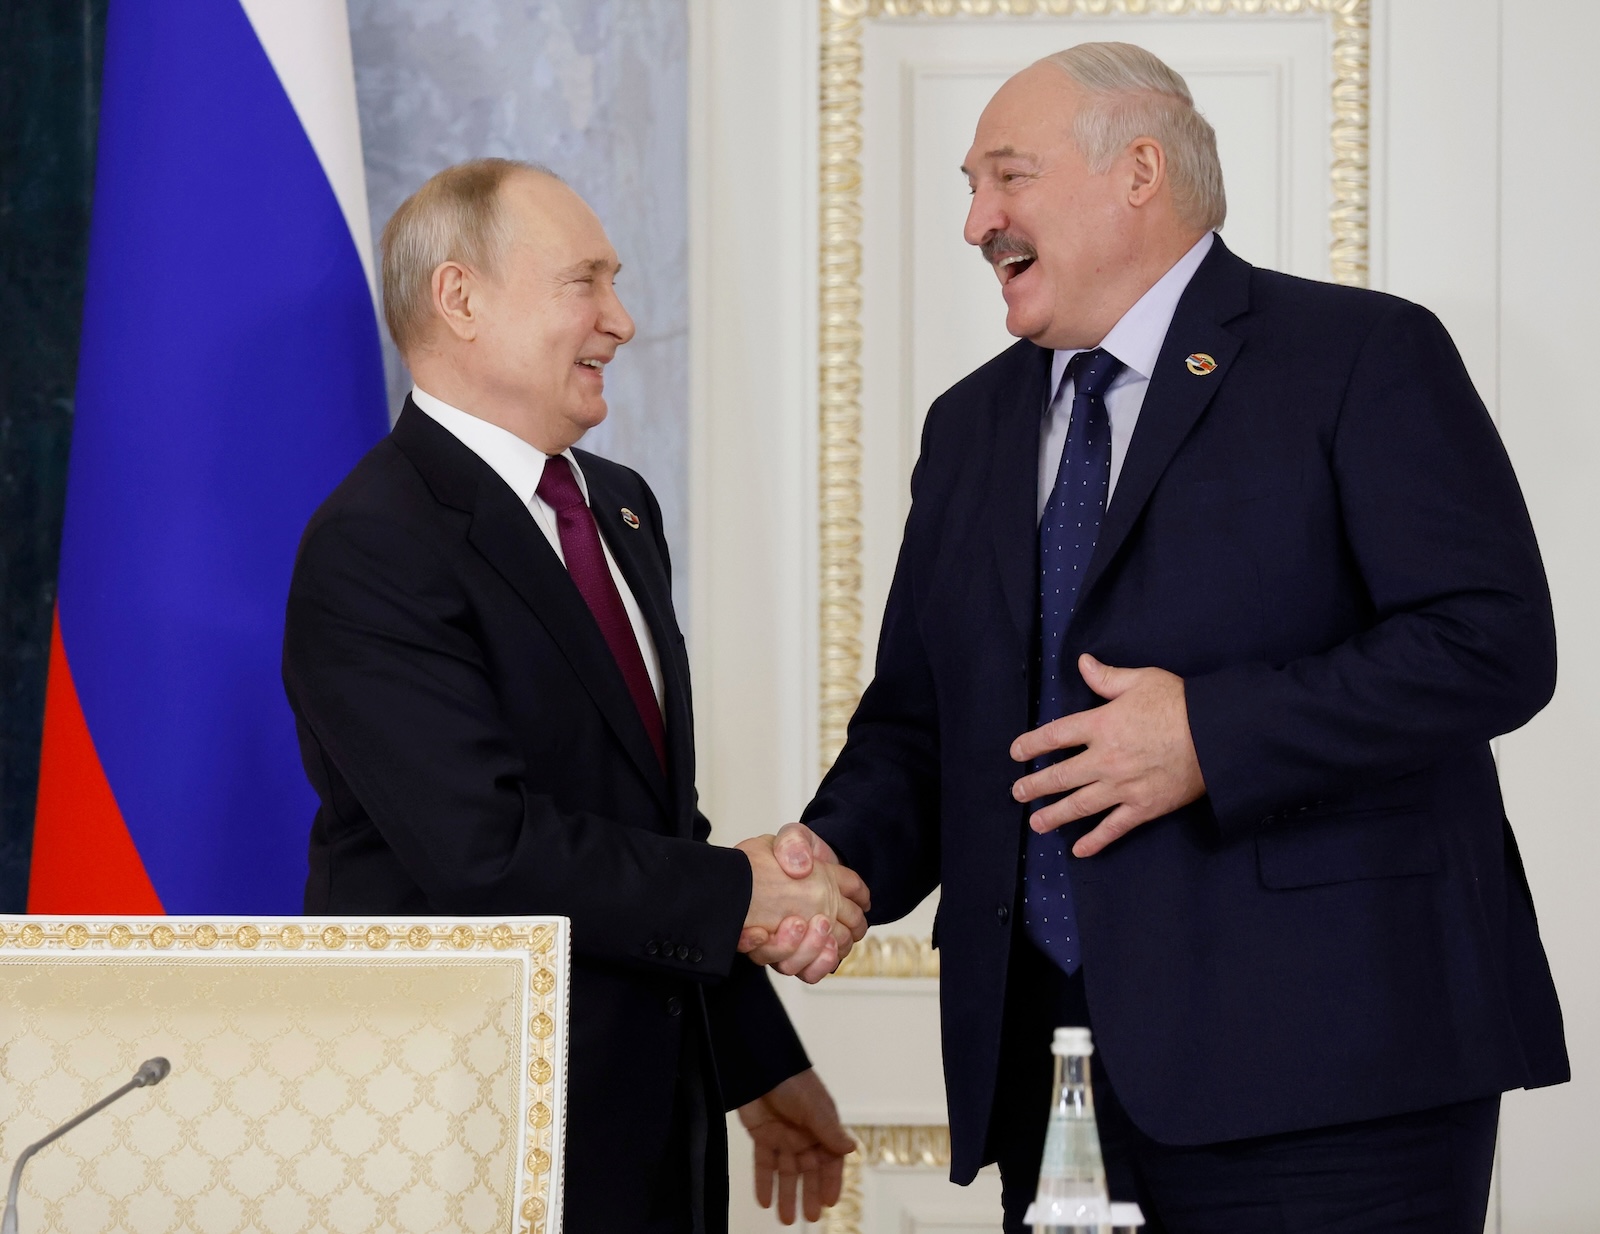 epa11112637 Russian President Vladimir Putin (L) and Belarusian President Alexander Lukashenko react as they shake hands during a meeting of the Supreme State Council of the Russia-Belarus Union State in St. Petersburg, Russia, 29 January 2024. At a meeting of the Supreme State Council of the Union State, Alexander Lukashenko announced the need to intensify cooperation in the field of import substitution and proposed creating a union media holding.  EPA/DMITRY ASTAKHOV / SPUTNIK / GOVERNMENT PRESS SERVICE POOL MANDATORY CREDIT